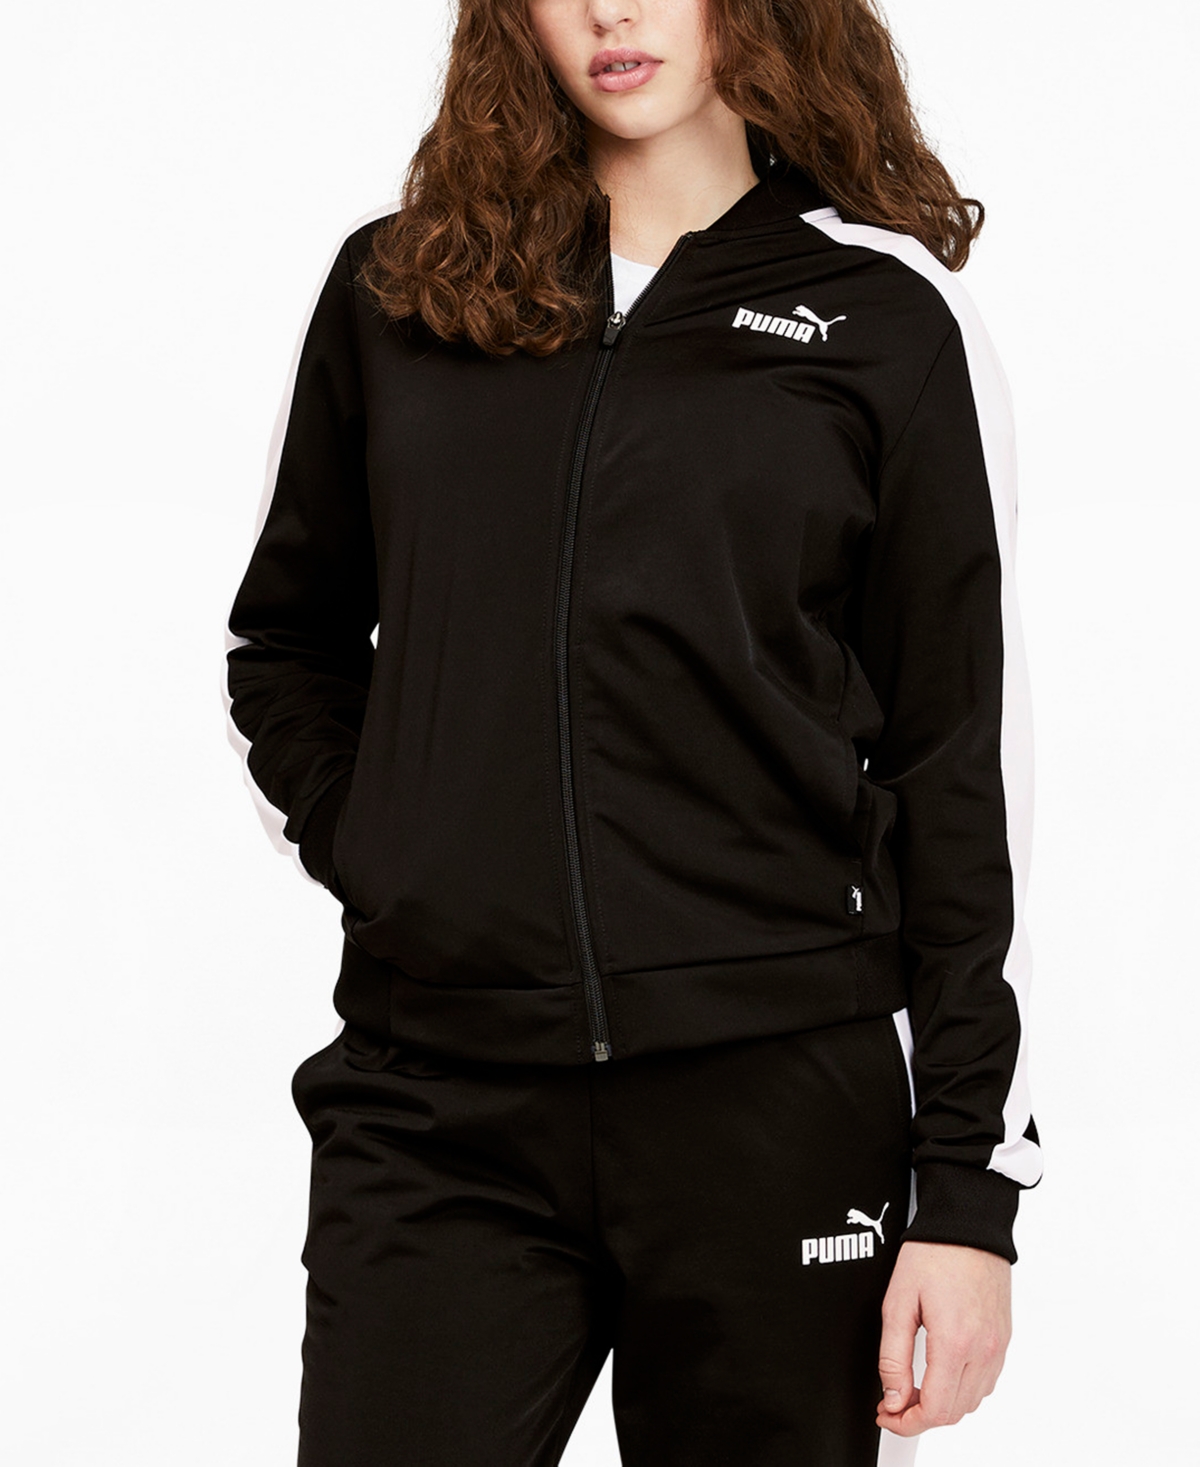 Women's Tricot Front Full-Zip Track Jacket - Black